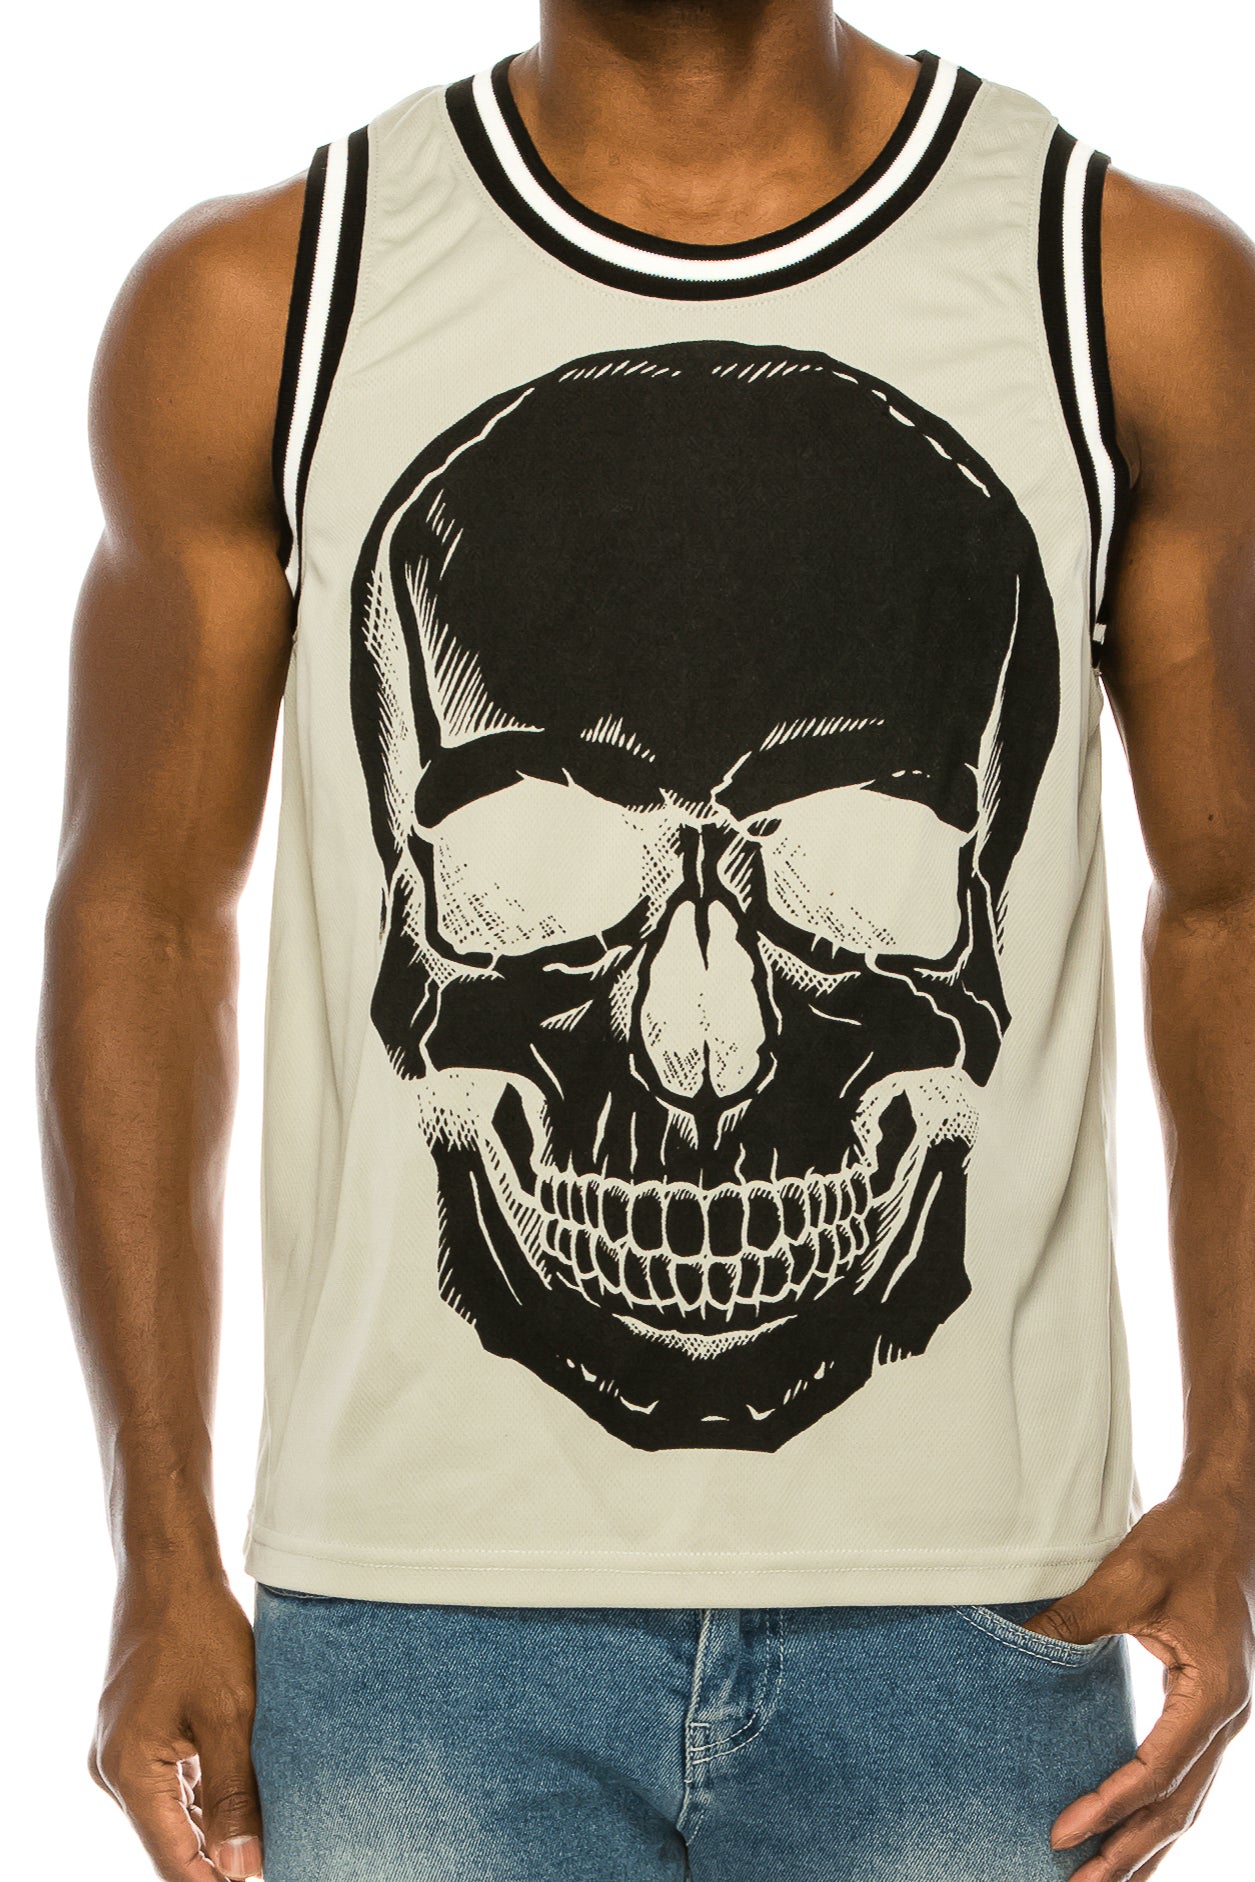 GREY JERSEY WITH BLACK SKULL